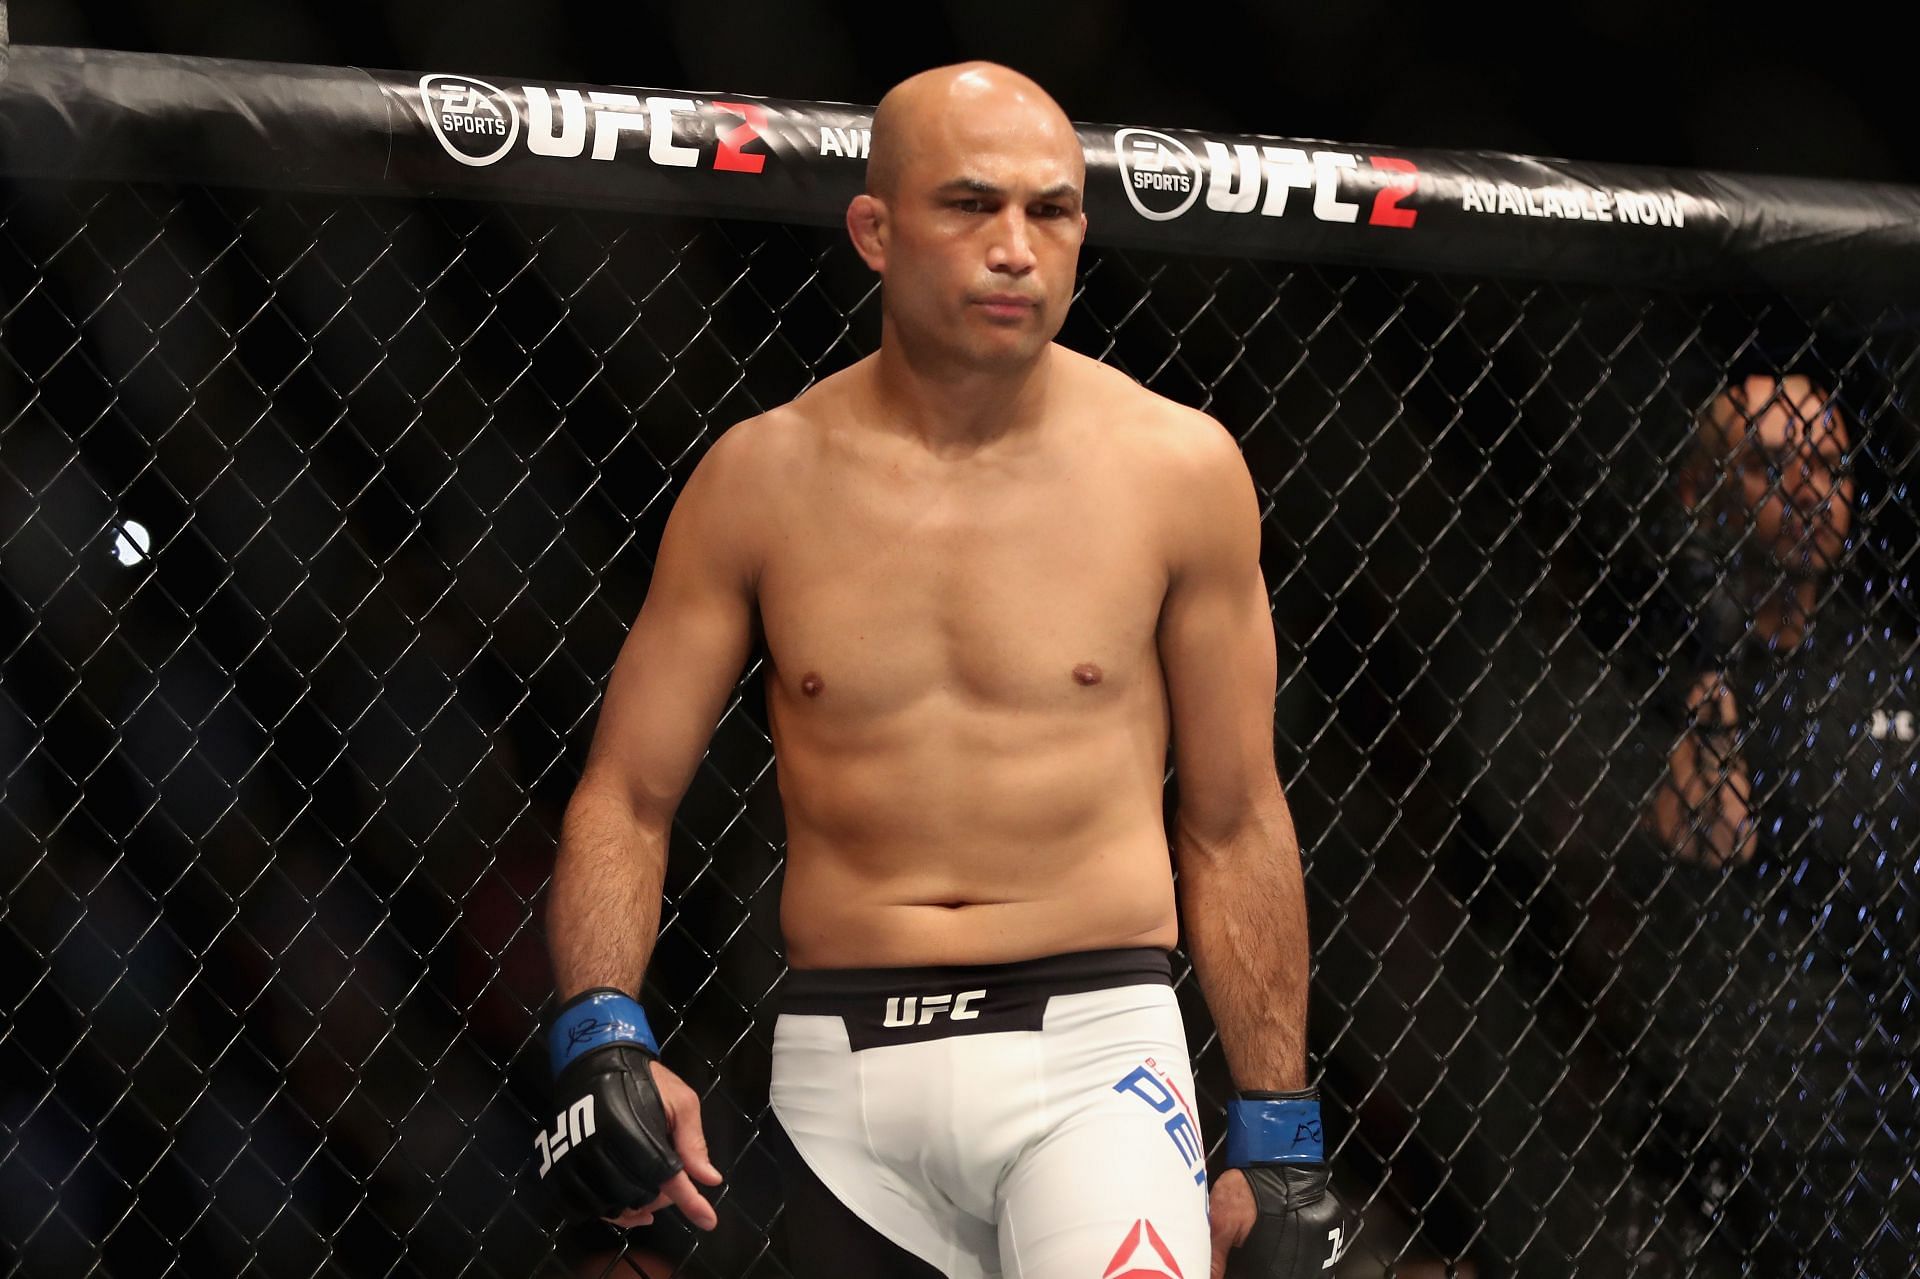 BJ Penn&#039;s skills at his best would allow him to dominate today&#039;s best lightweights